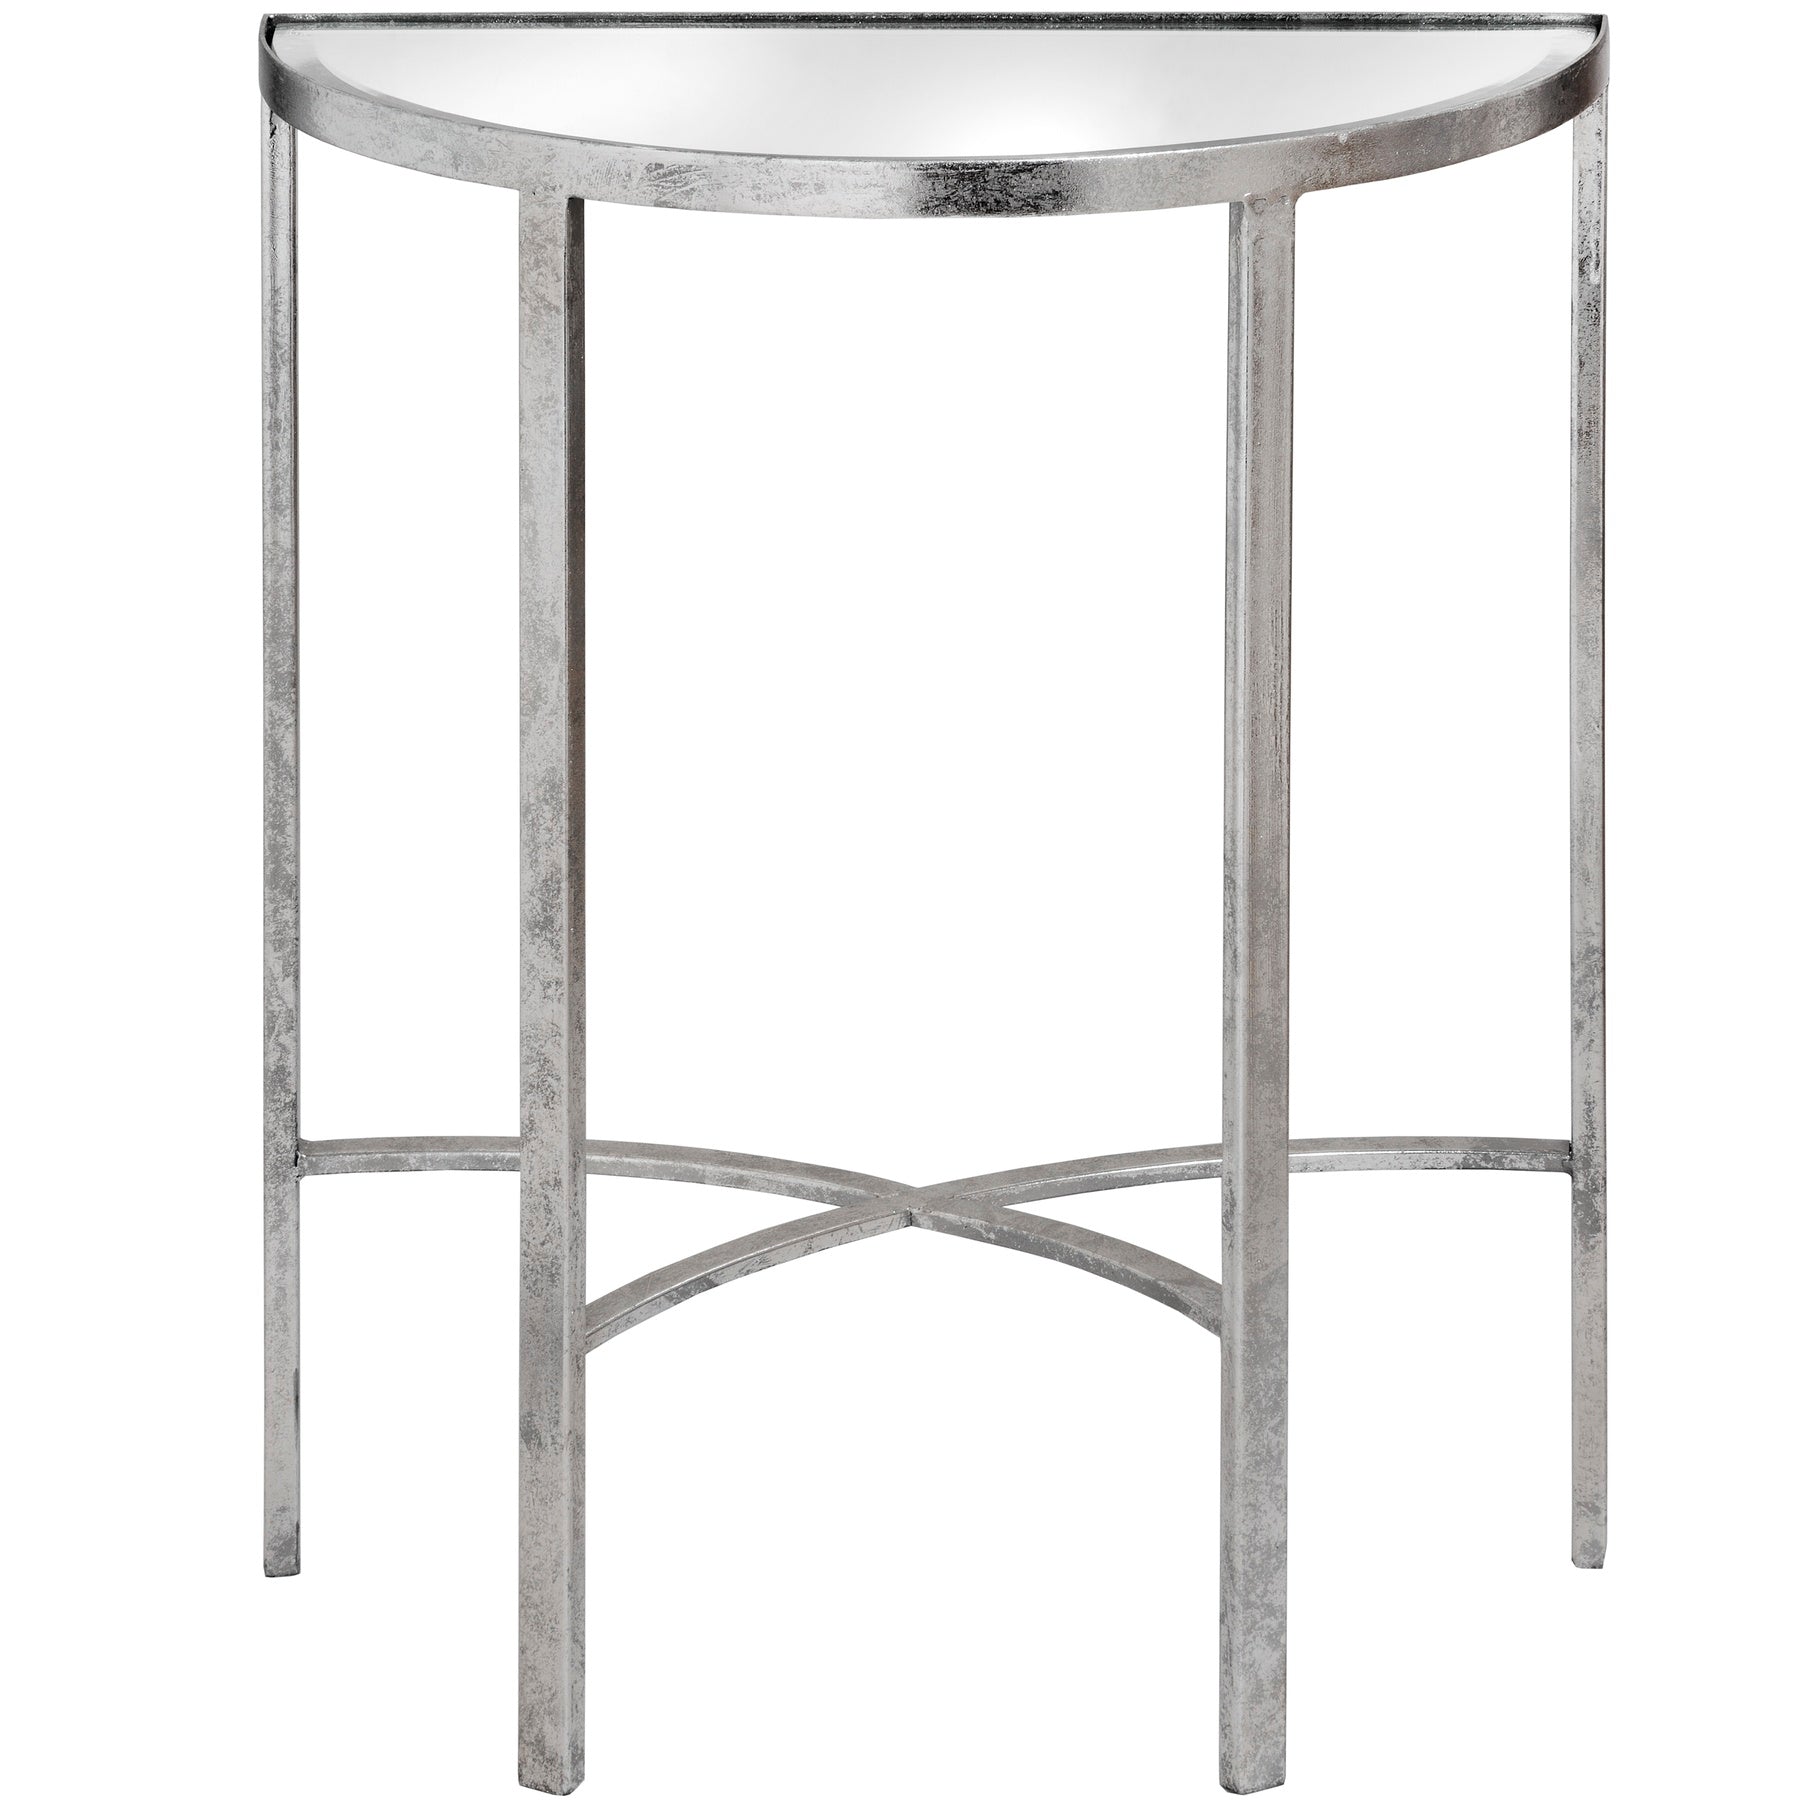 Mirrored Silver Half Moon Table With Cross Detail